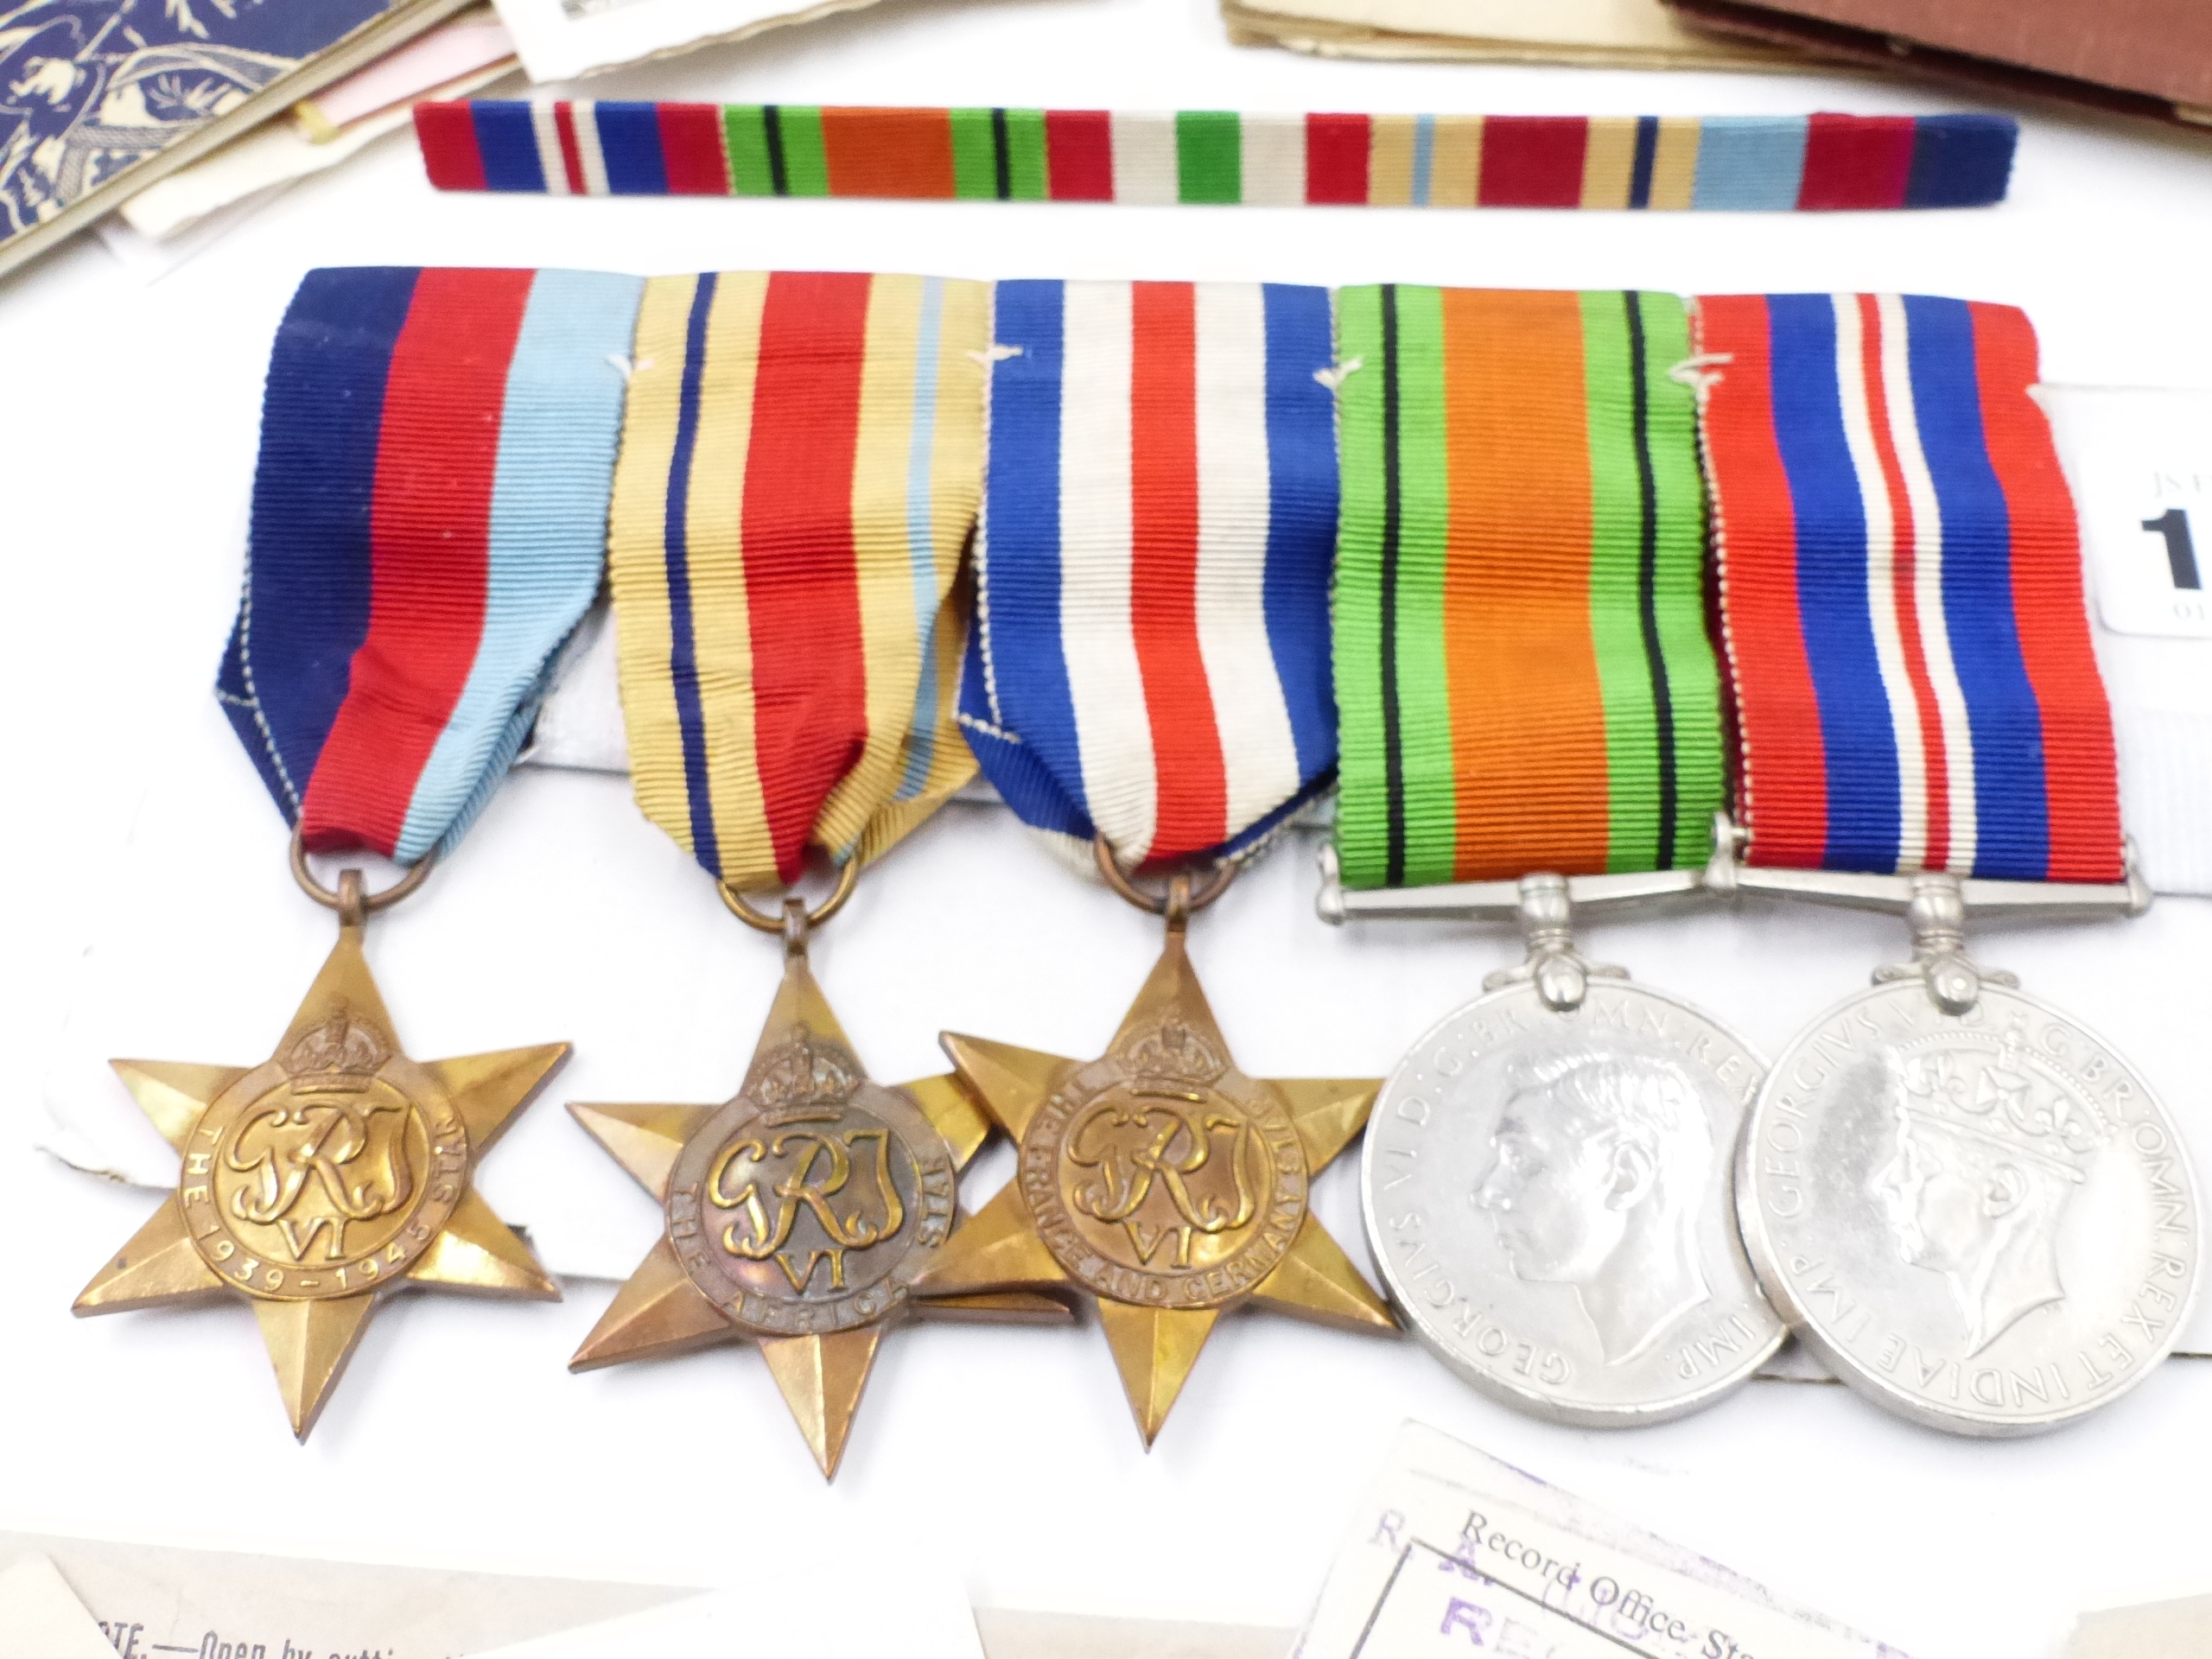 A GROUP OF FIVE WWII MEDALS AND RELATED EPHEMERA TO 1609117 FRED ALCOCK. - Image 5 of 12